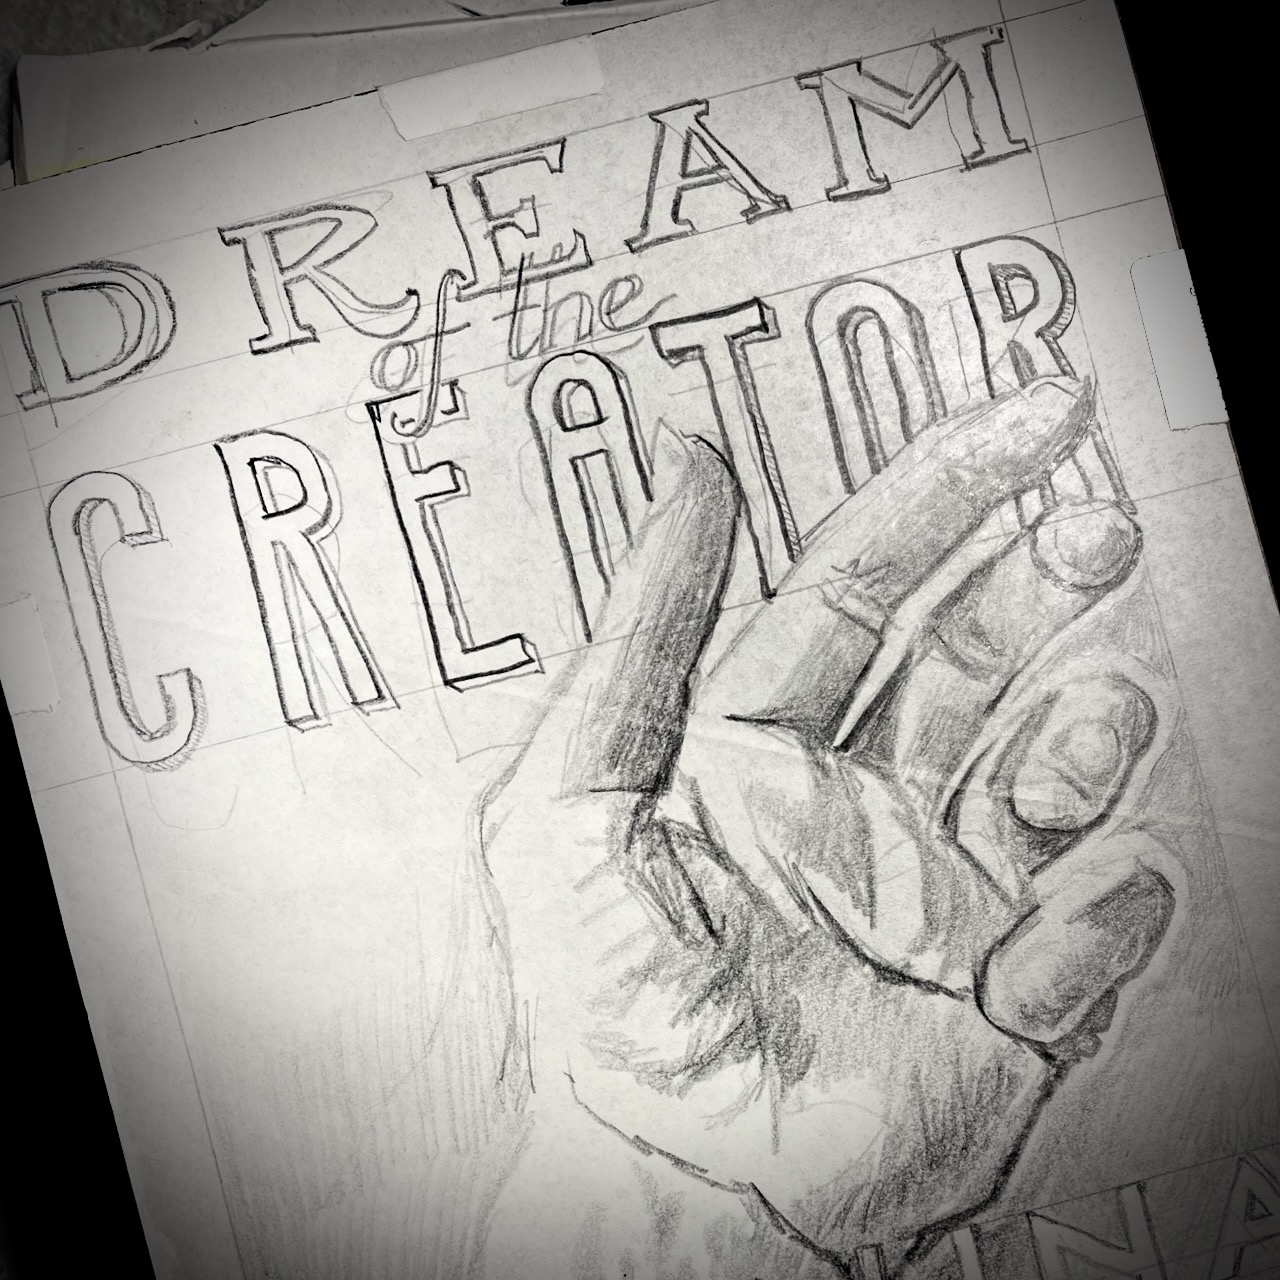 Dream of the Creator cover sketch v0.1 - © 2019 Gregory Roberts